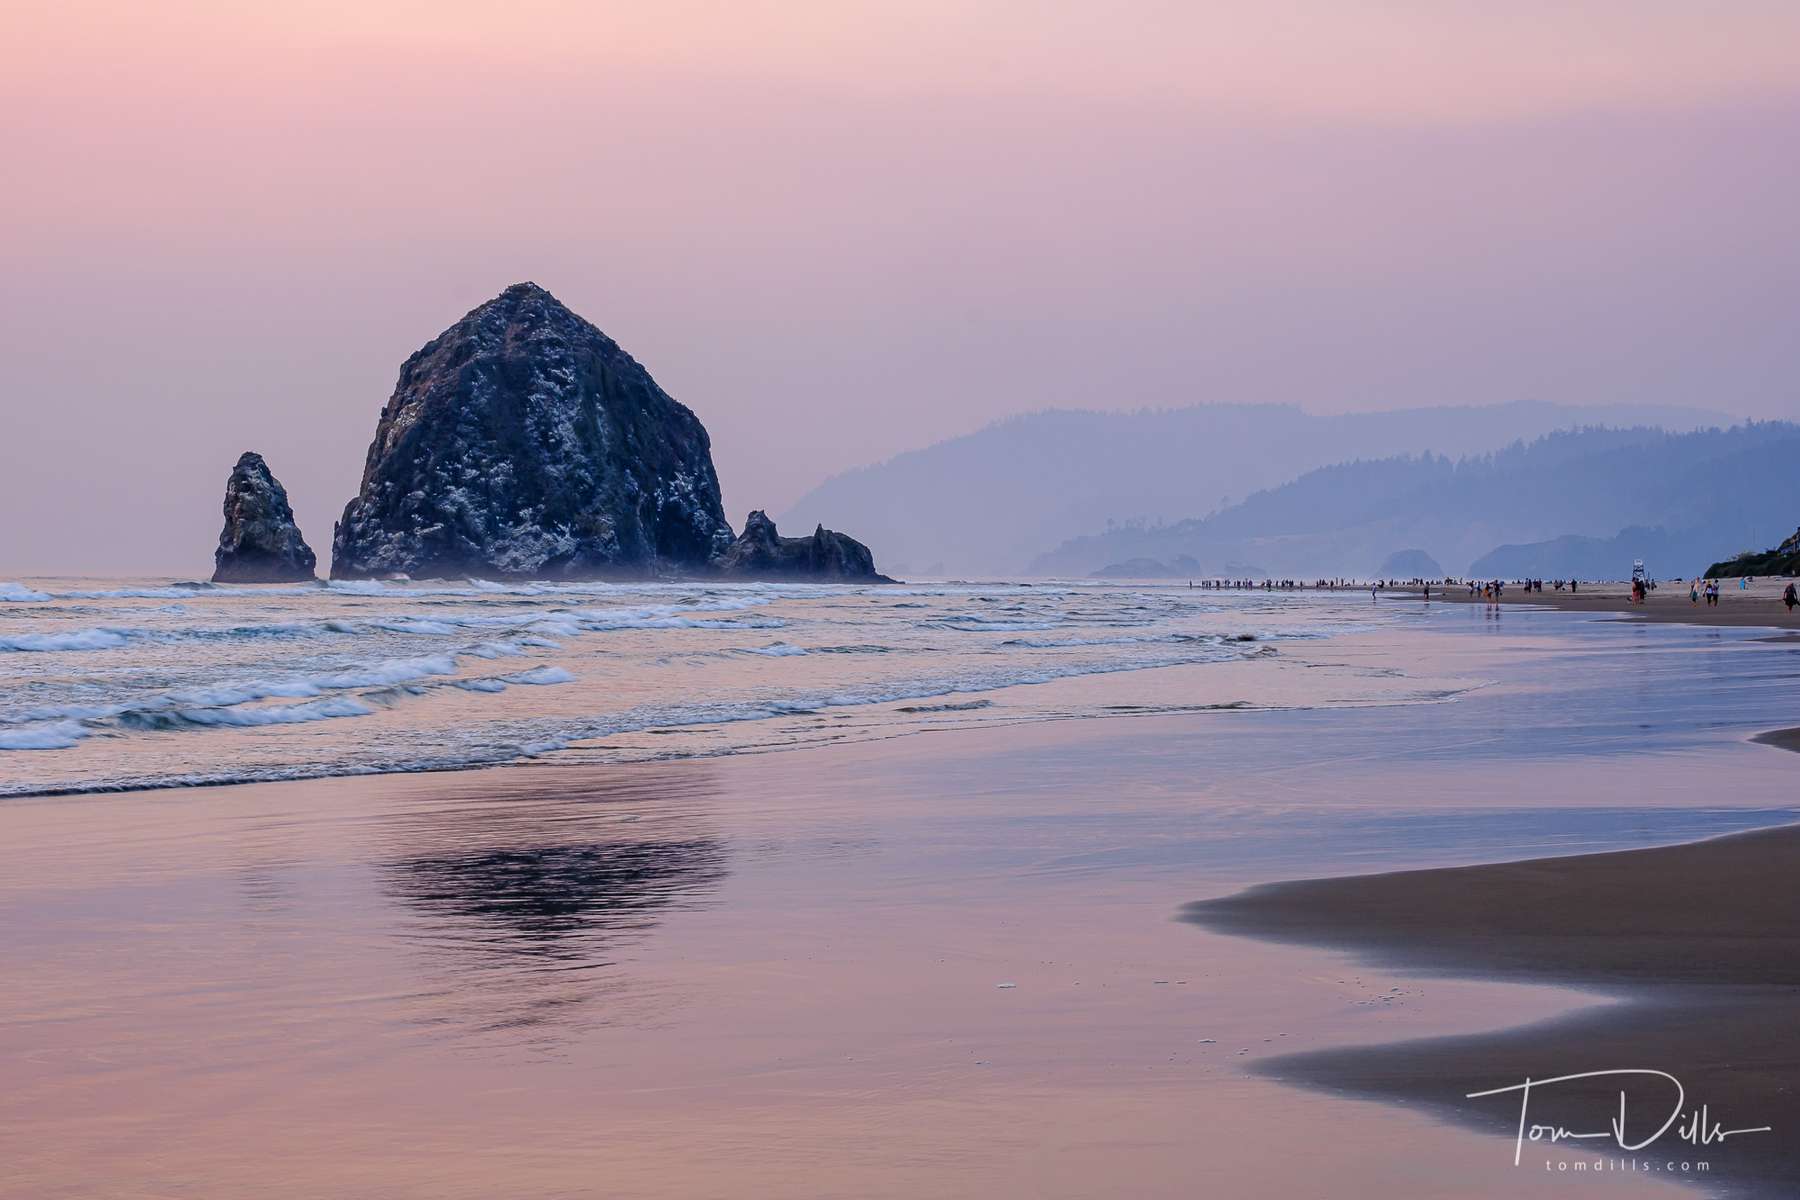 Haystack Rock at sunset over the Pacific Ocean from Cannon Beach, Oregon